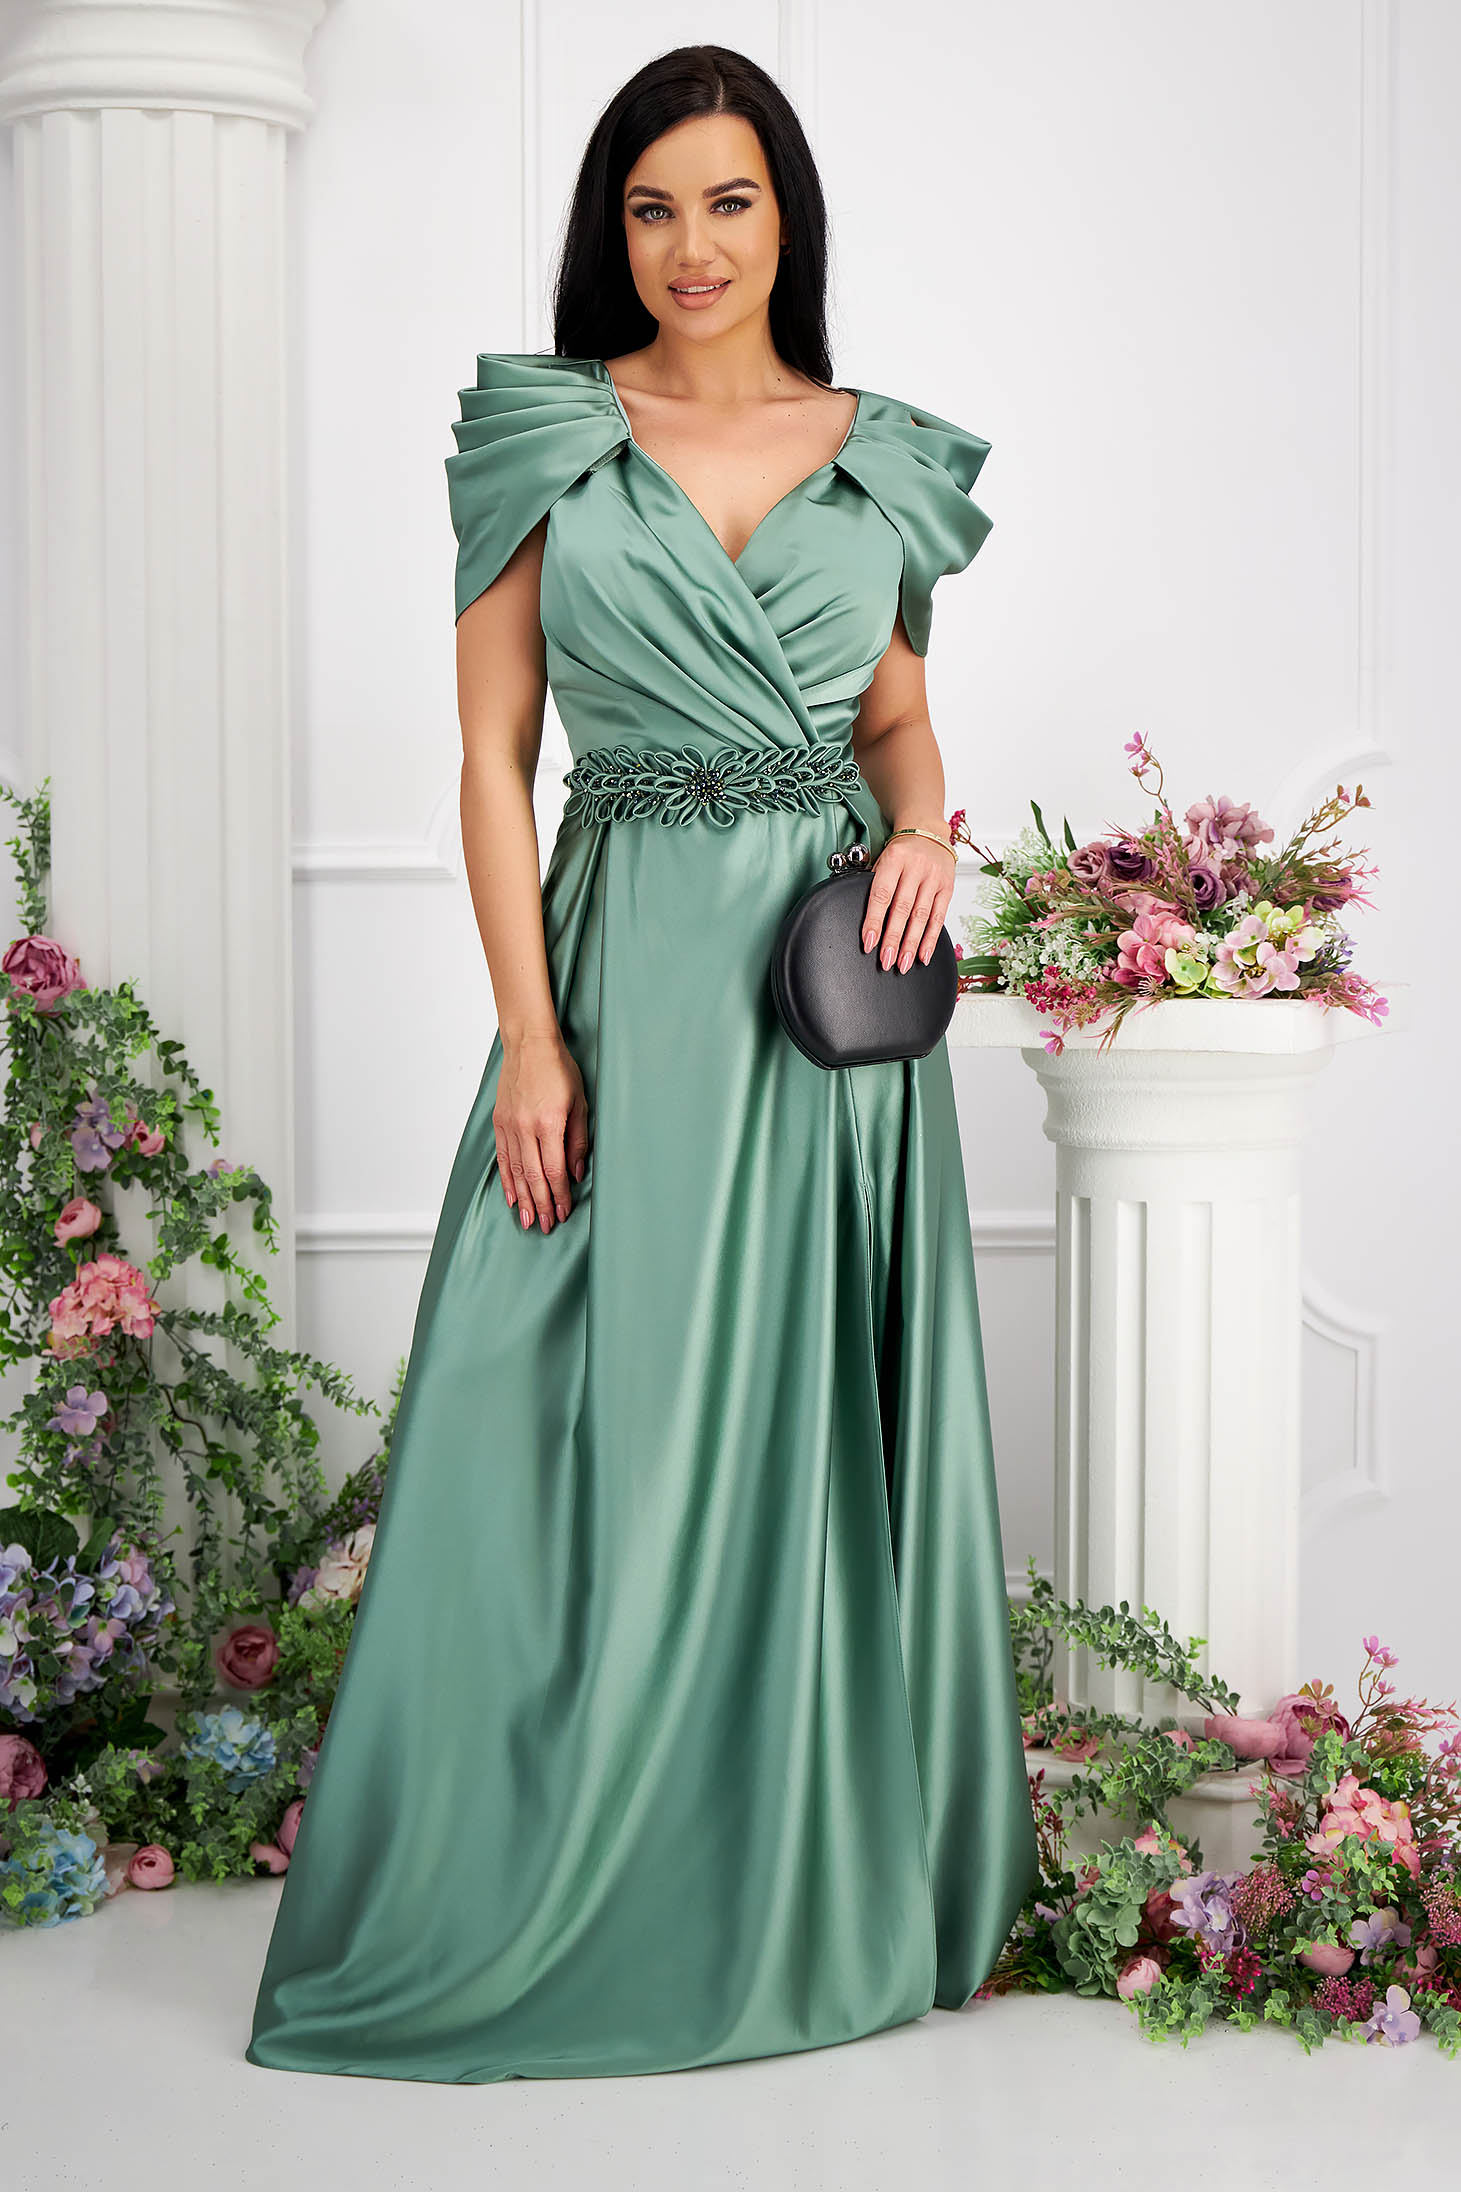 Green dress taffeta long cloche wrap over front with raised flowers